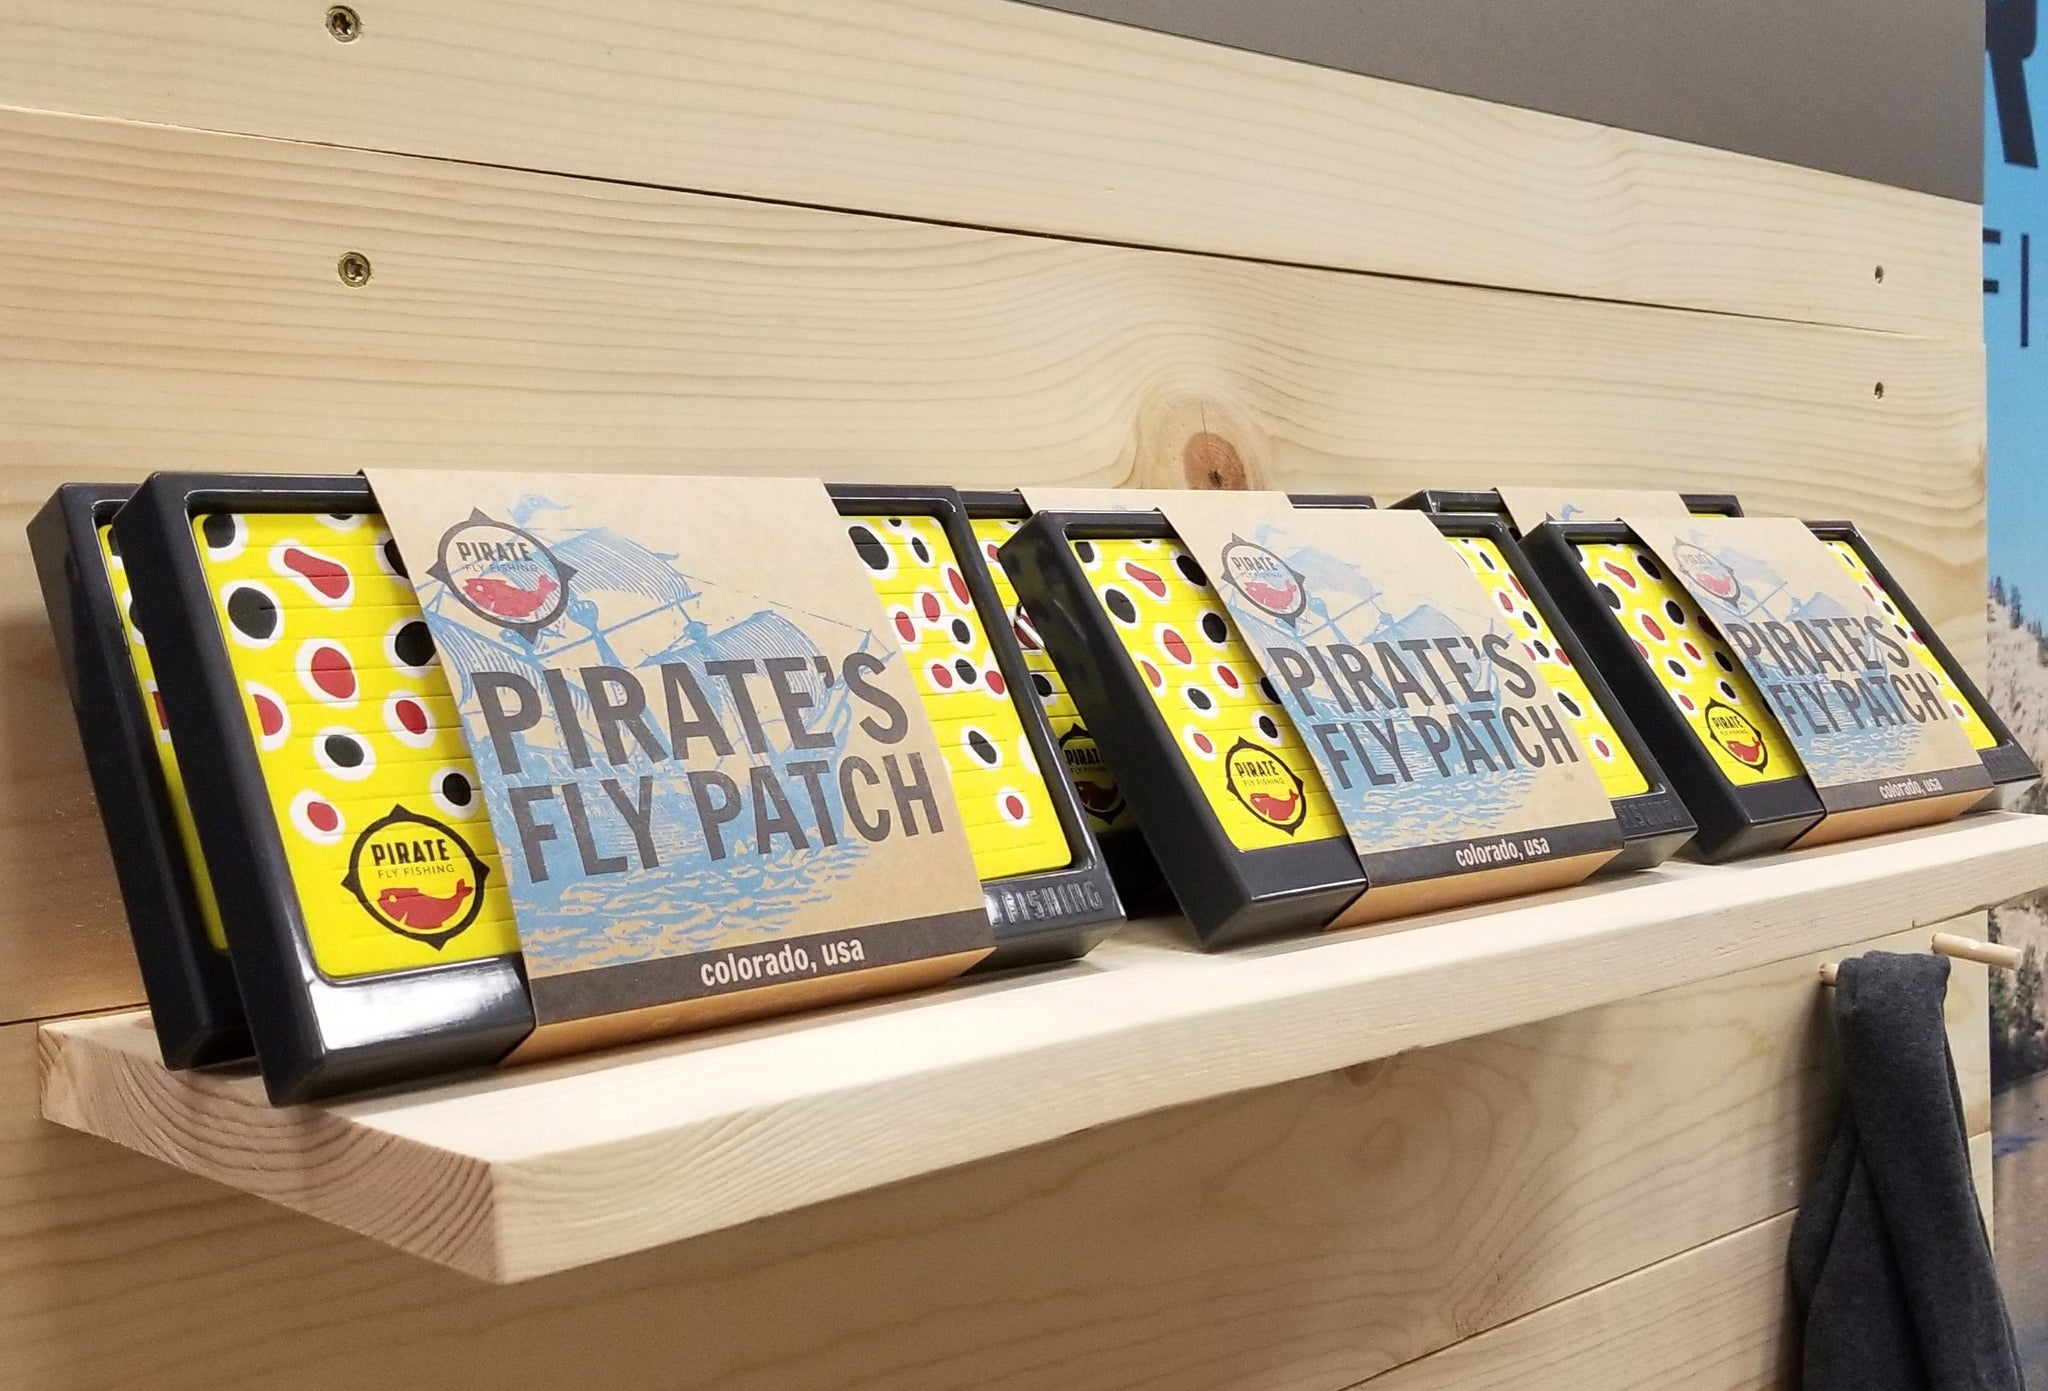 Pirate's Fly Patch - Pirate Fly Fishing